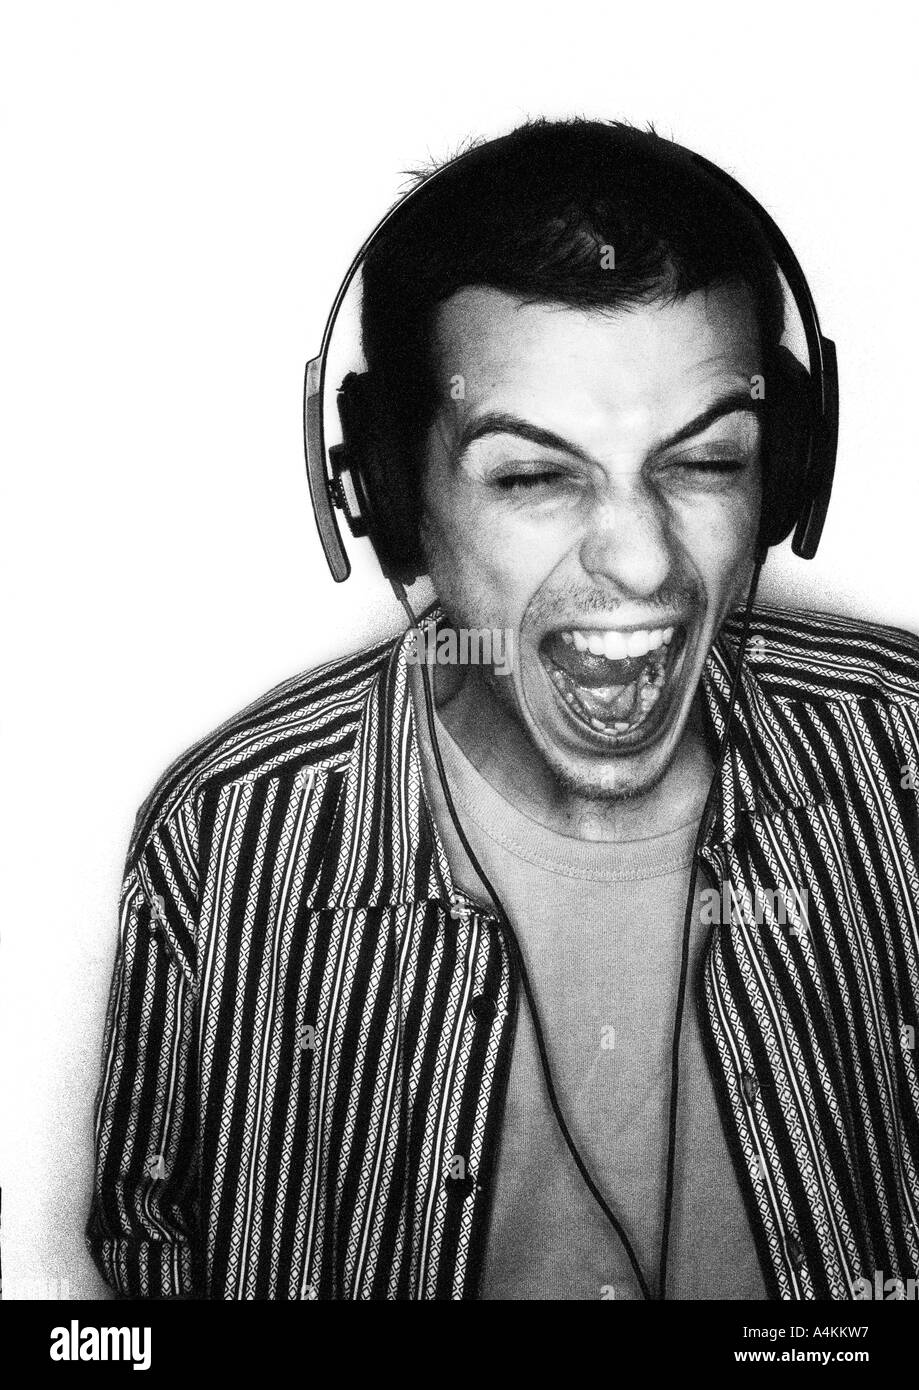 Man listening to headphones with mouth wide open, portrait Stock Photo